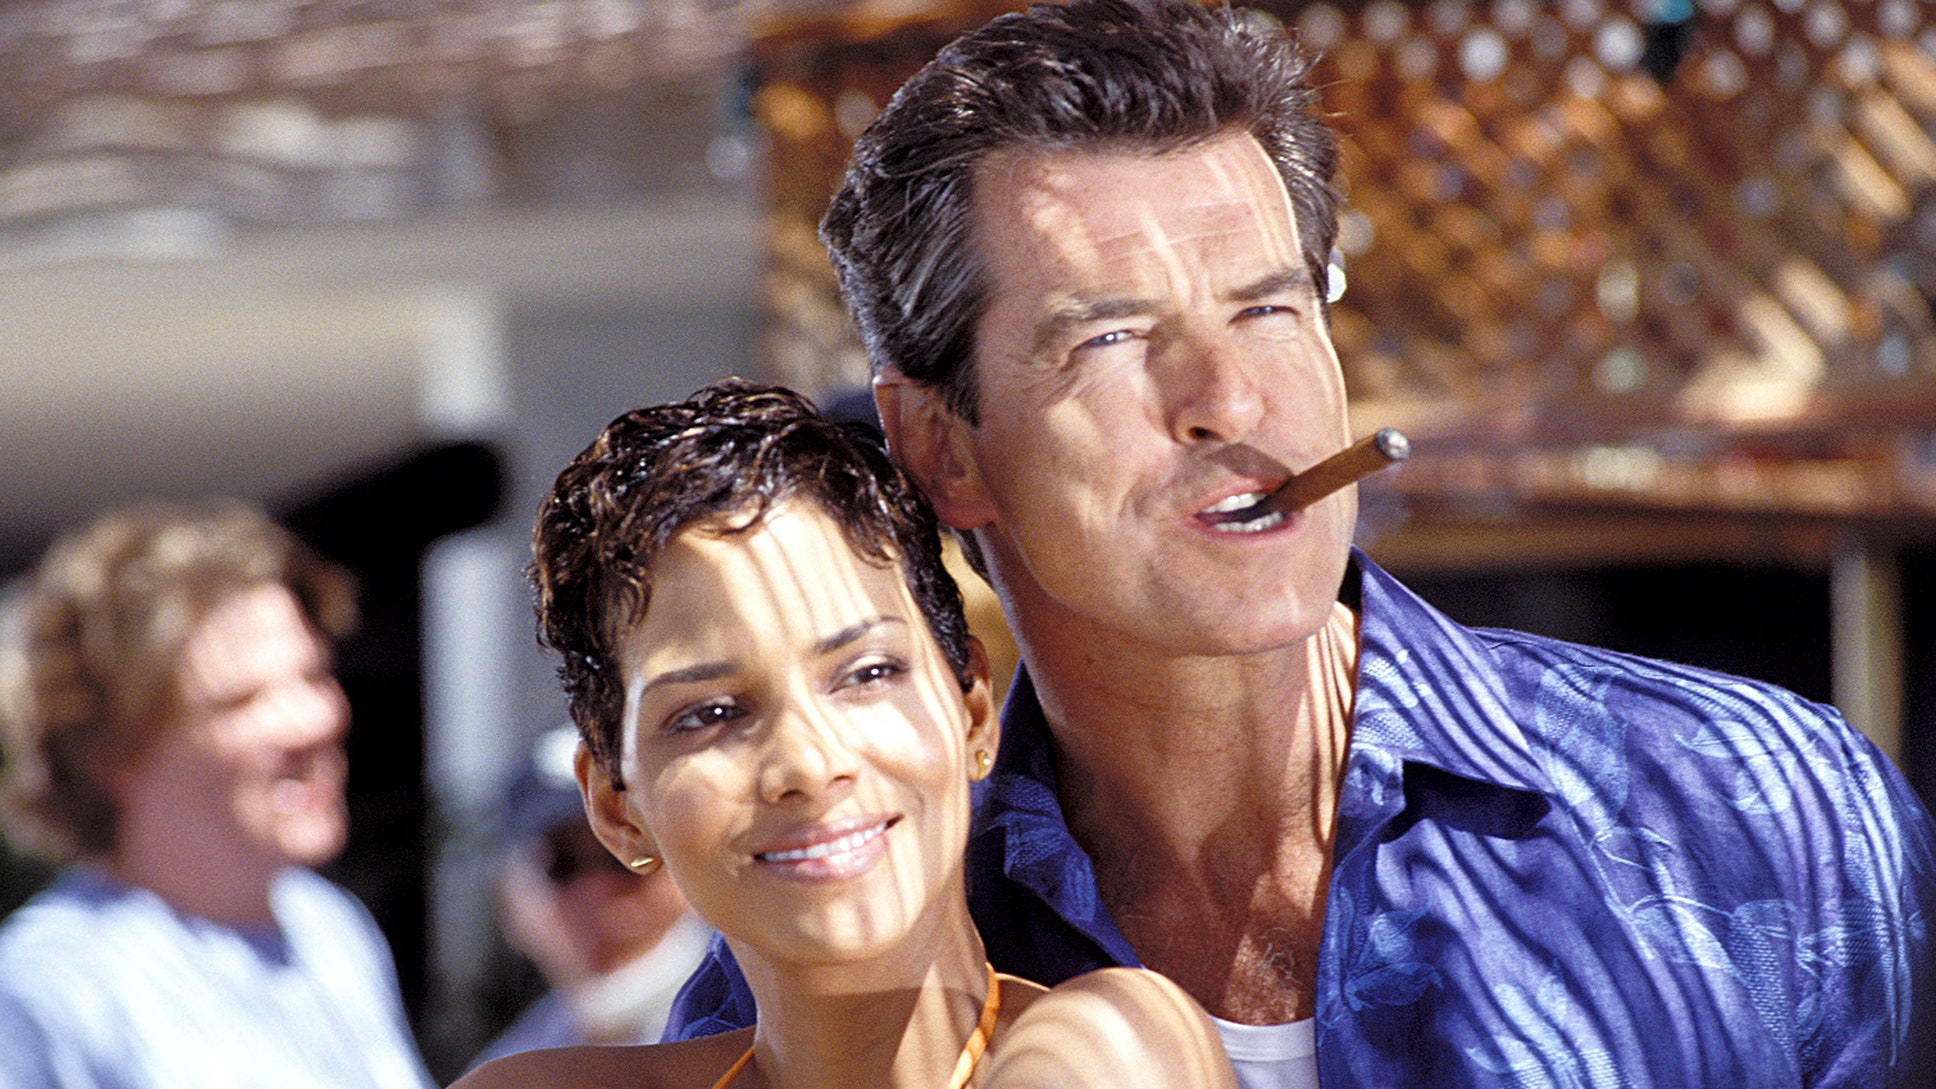 halle-berry-says-james-bond-pierce-brosnan-once-saved-her-life-during-love-scene-3